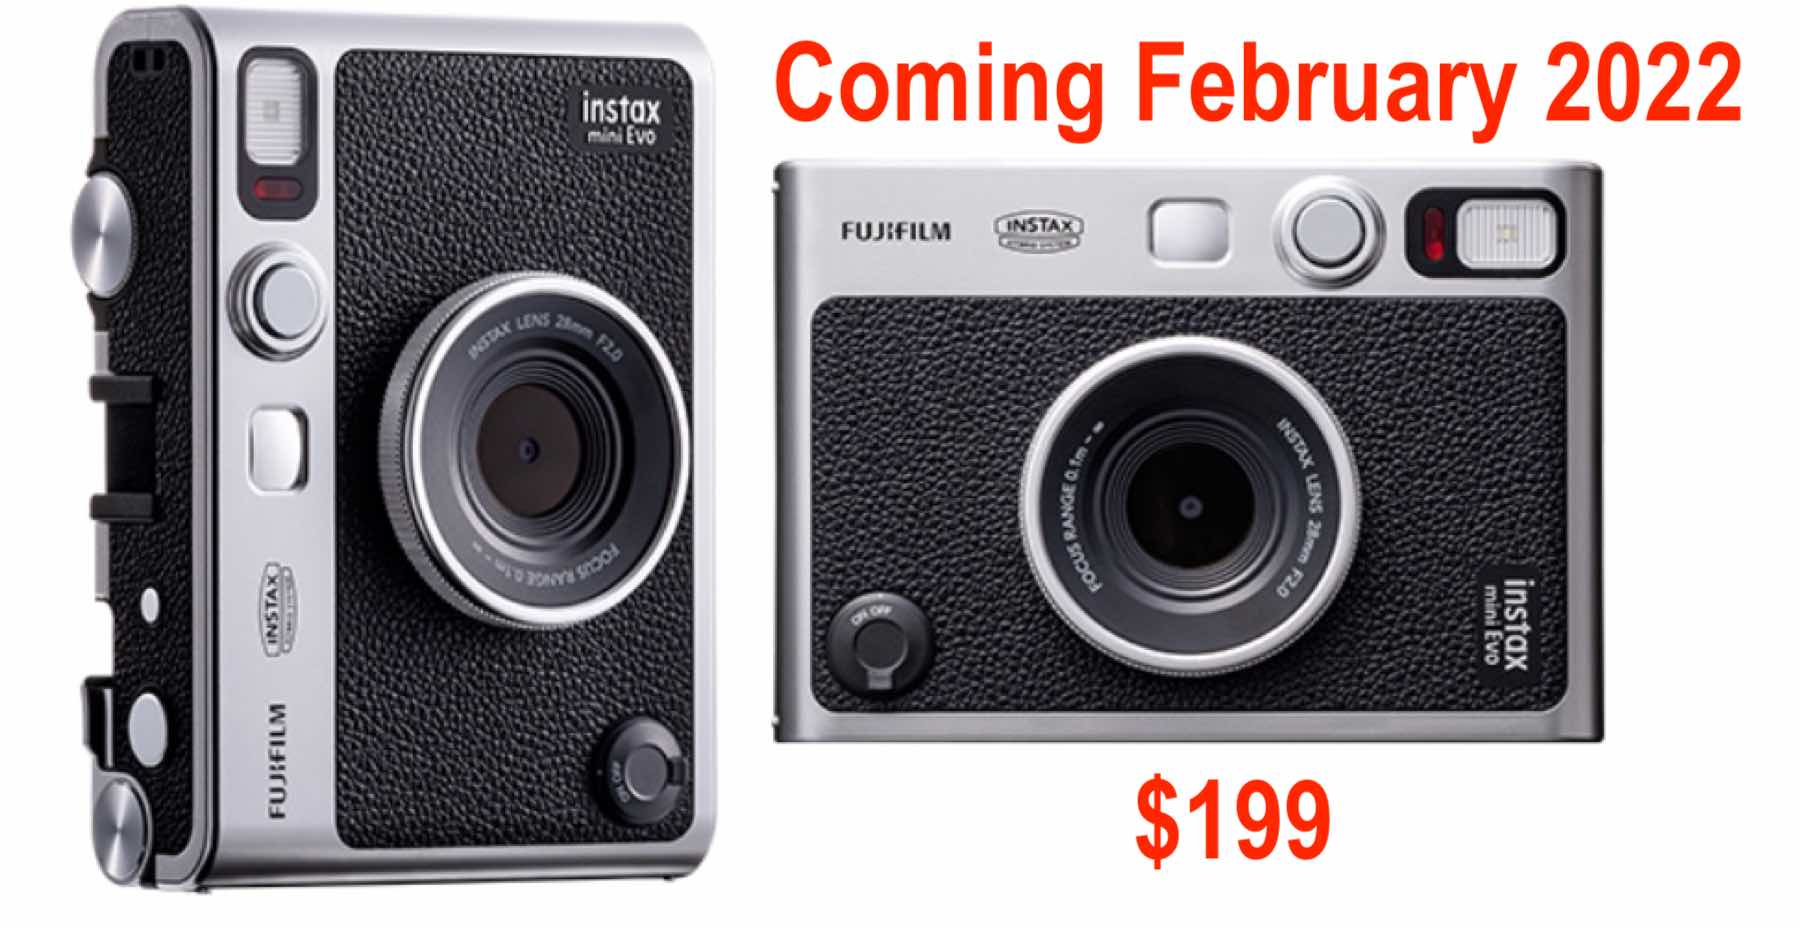 Fujifilm Instax Mini EVO coming for $199 to US and Europe in